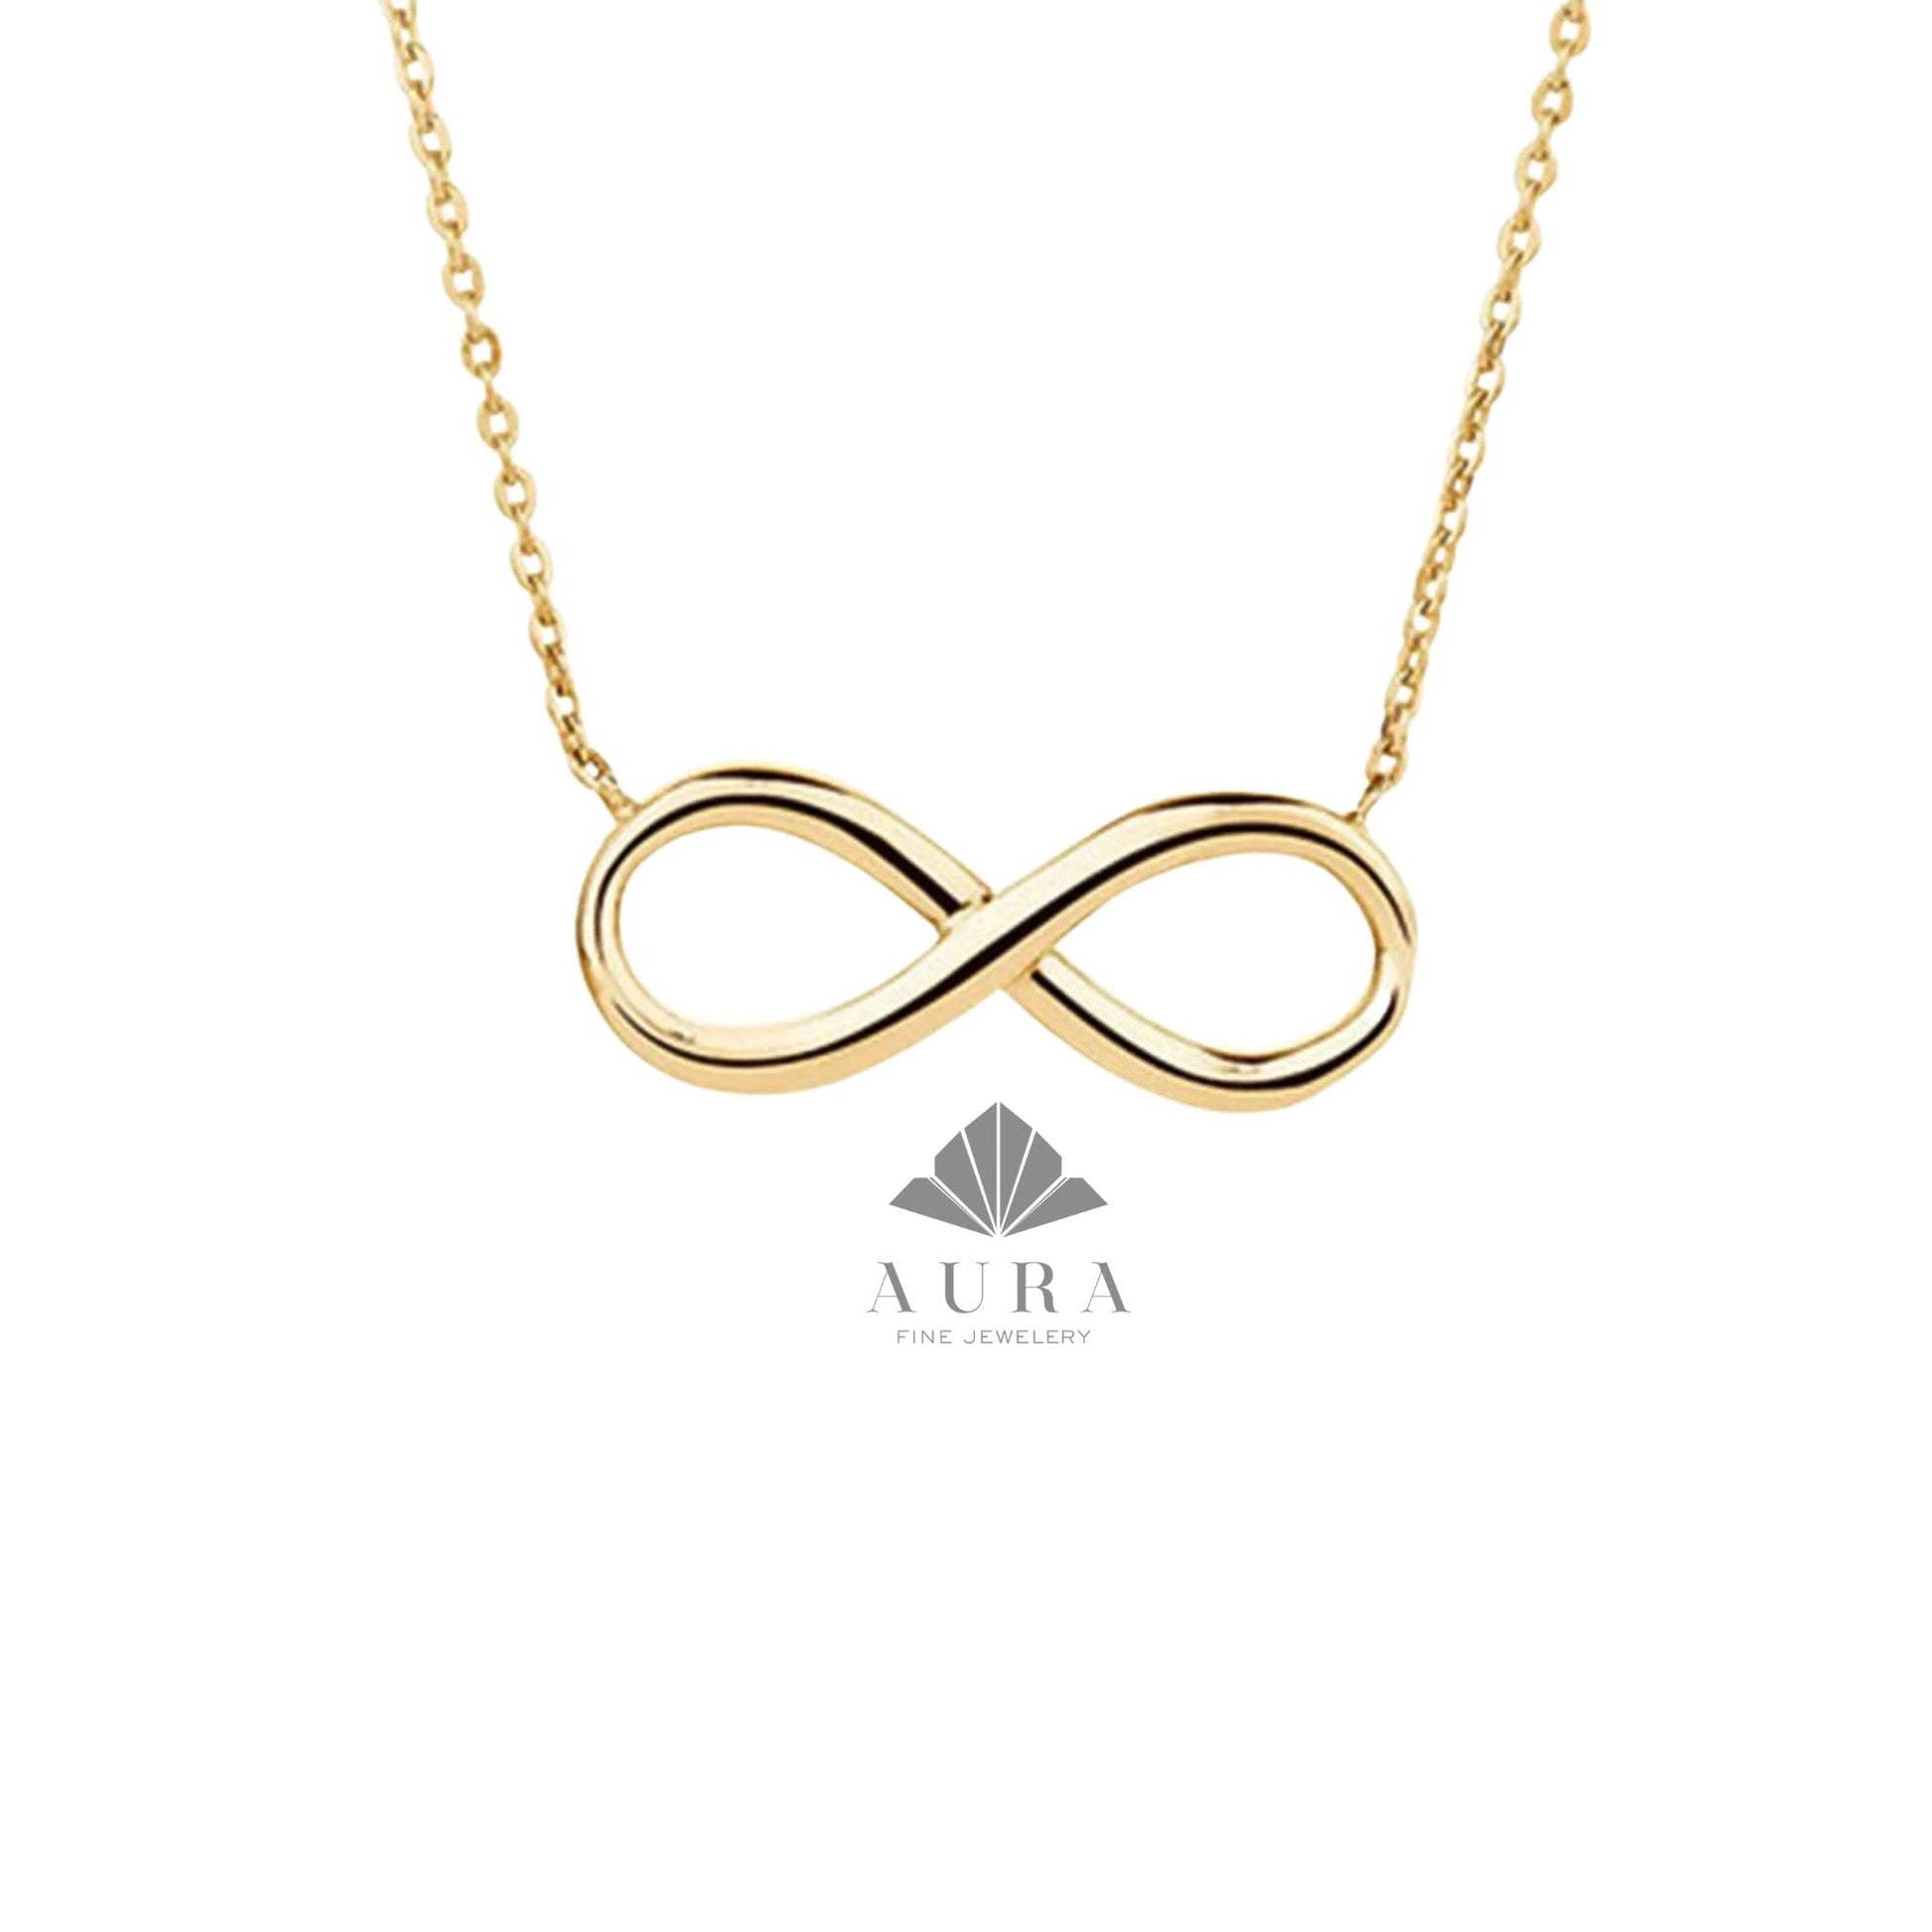 14K Gold Infinity Necklace, Infinity Pendant, Eternity Necklace, Infinite Love Necklace, Valentines Day Gift, Forever Friendship Necklace